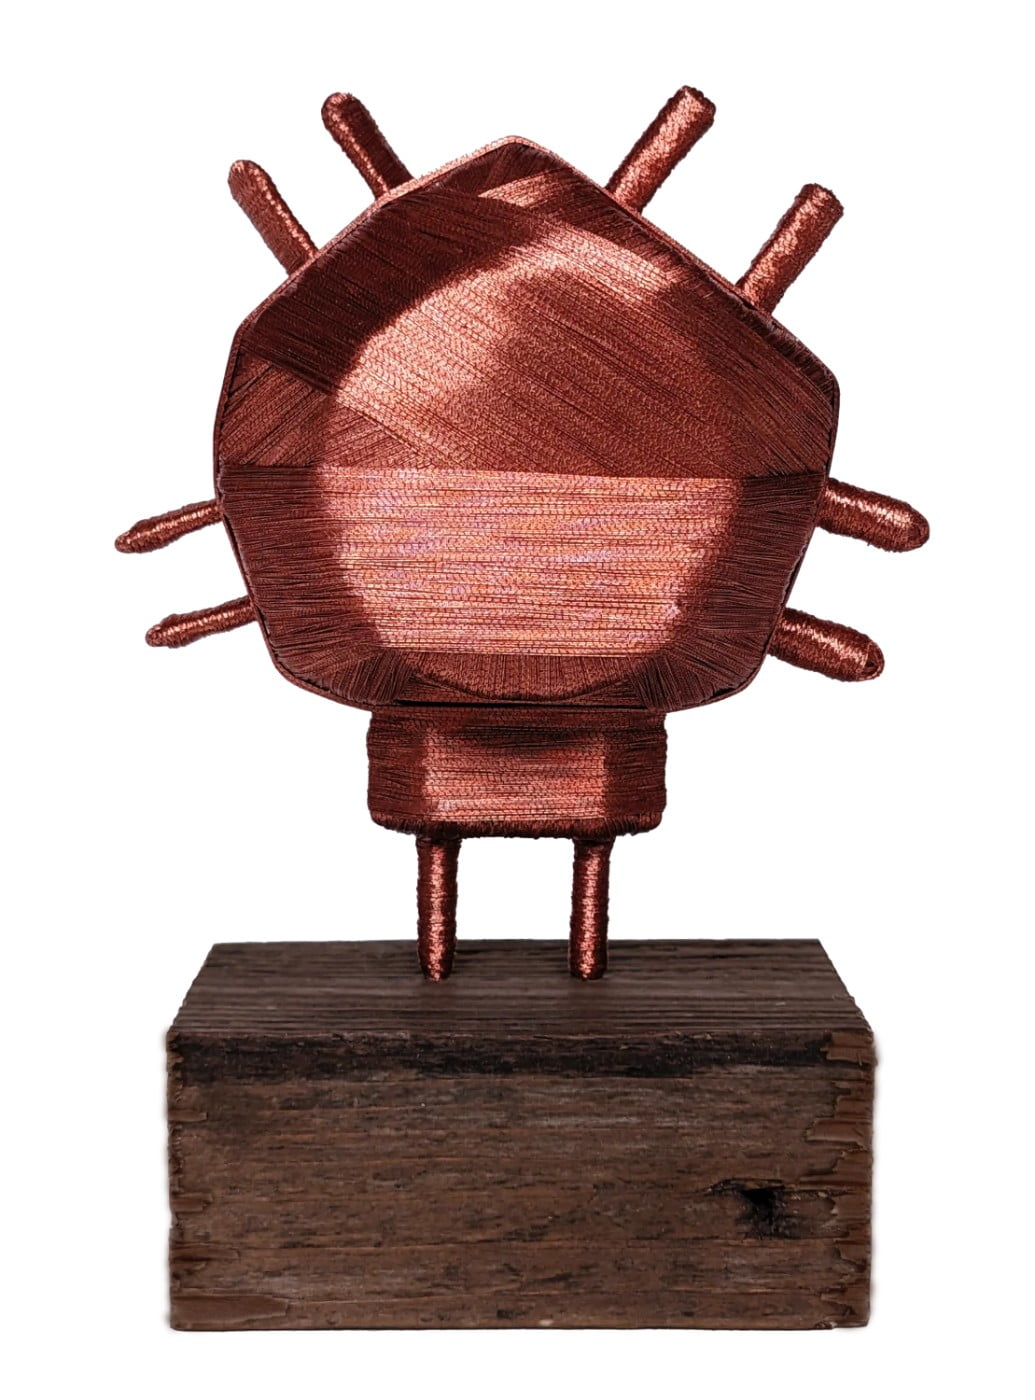 "Spiritual Machines, Statuette 76" recycled object: Travel adapter plug, eco-friendly copper coloured wire, 11 × 4.5 cm, 2023